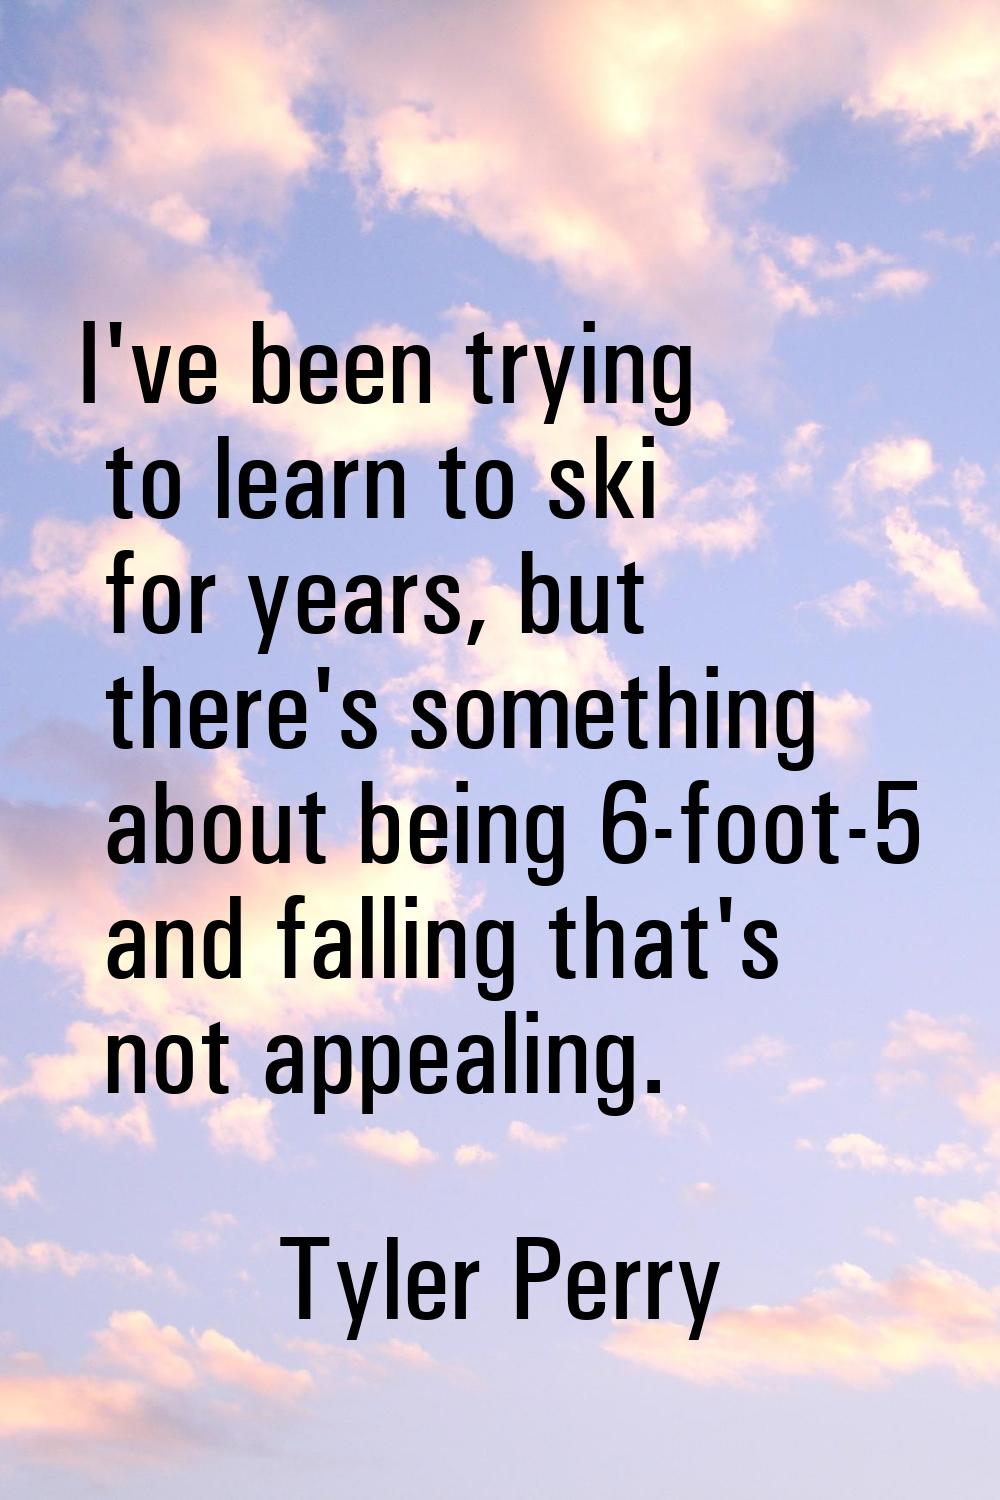 I've been trying to learn to ski for years, but there's something about being 6-foot-5 and falling 